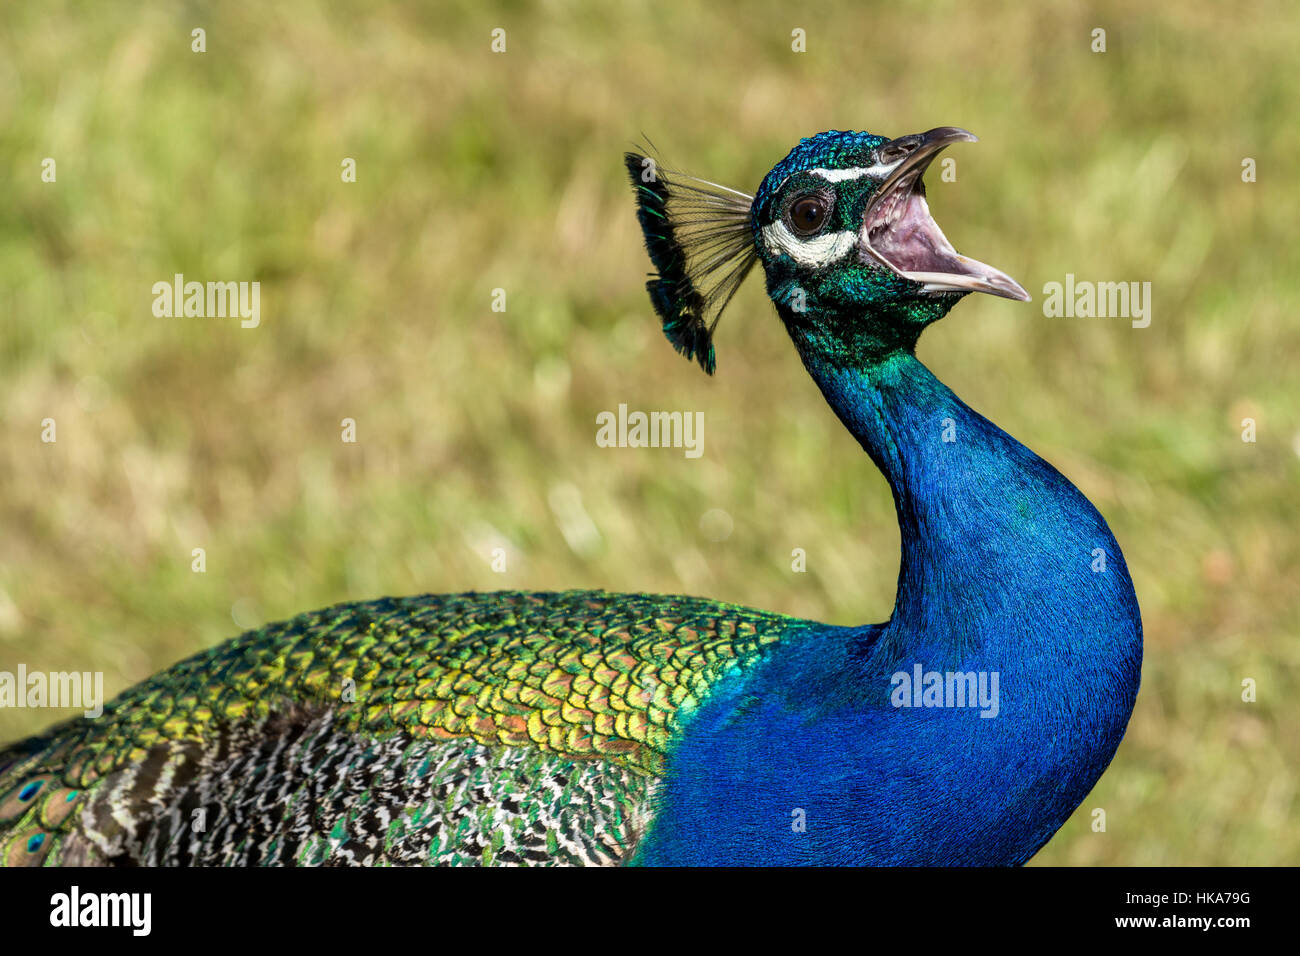 A Indian Peacock (Pavo cristatus) is screaming with the beak wide open Stock Photo